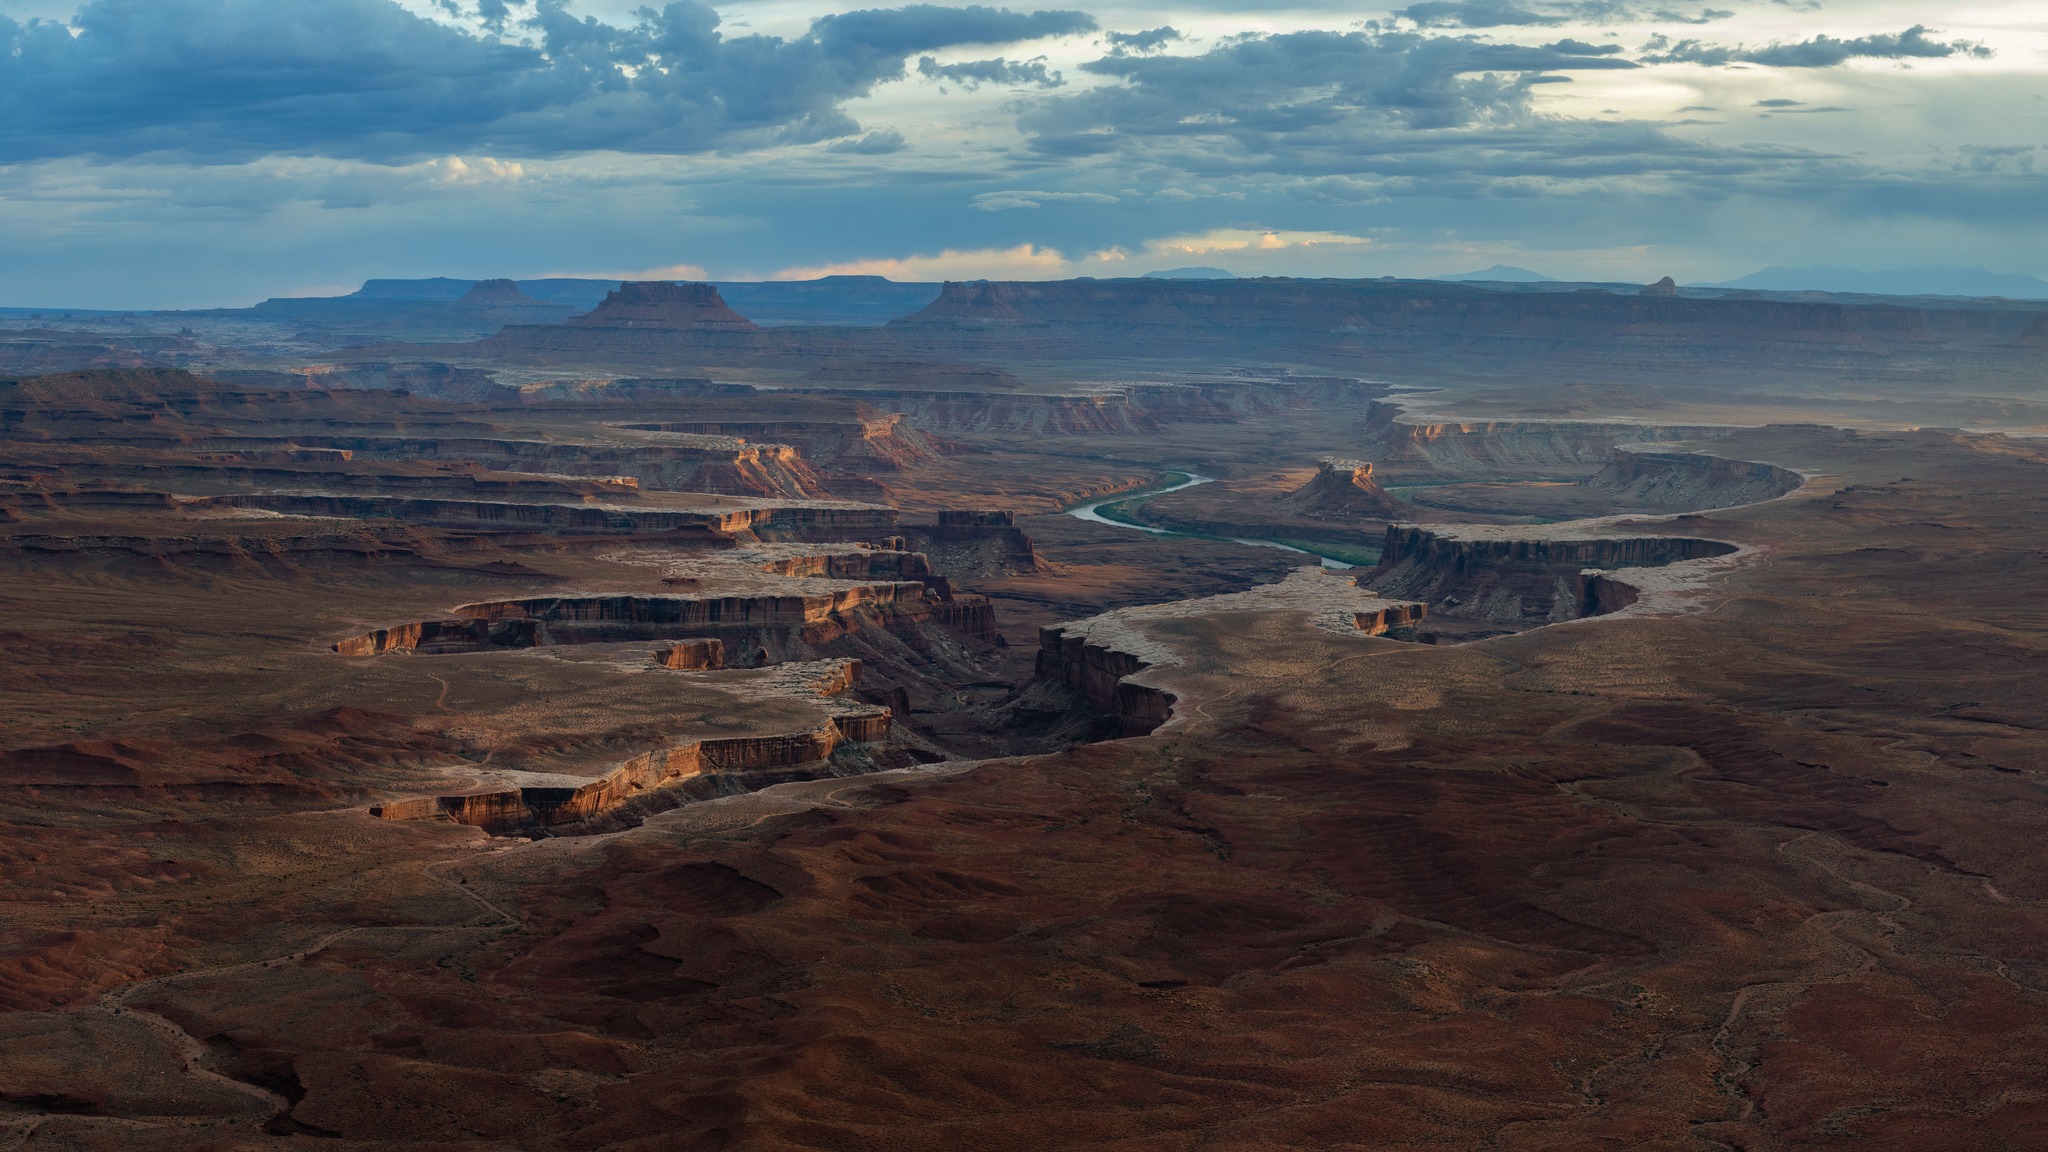 An aerial view of a Canyonlands in utah.